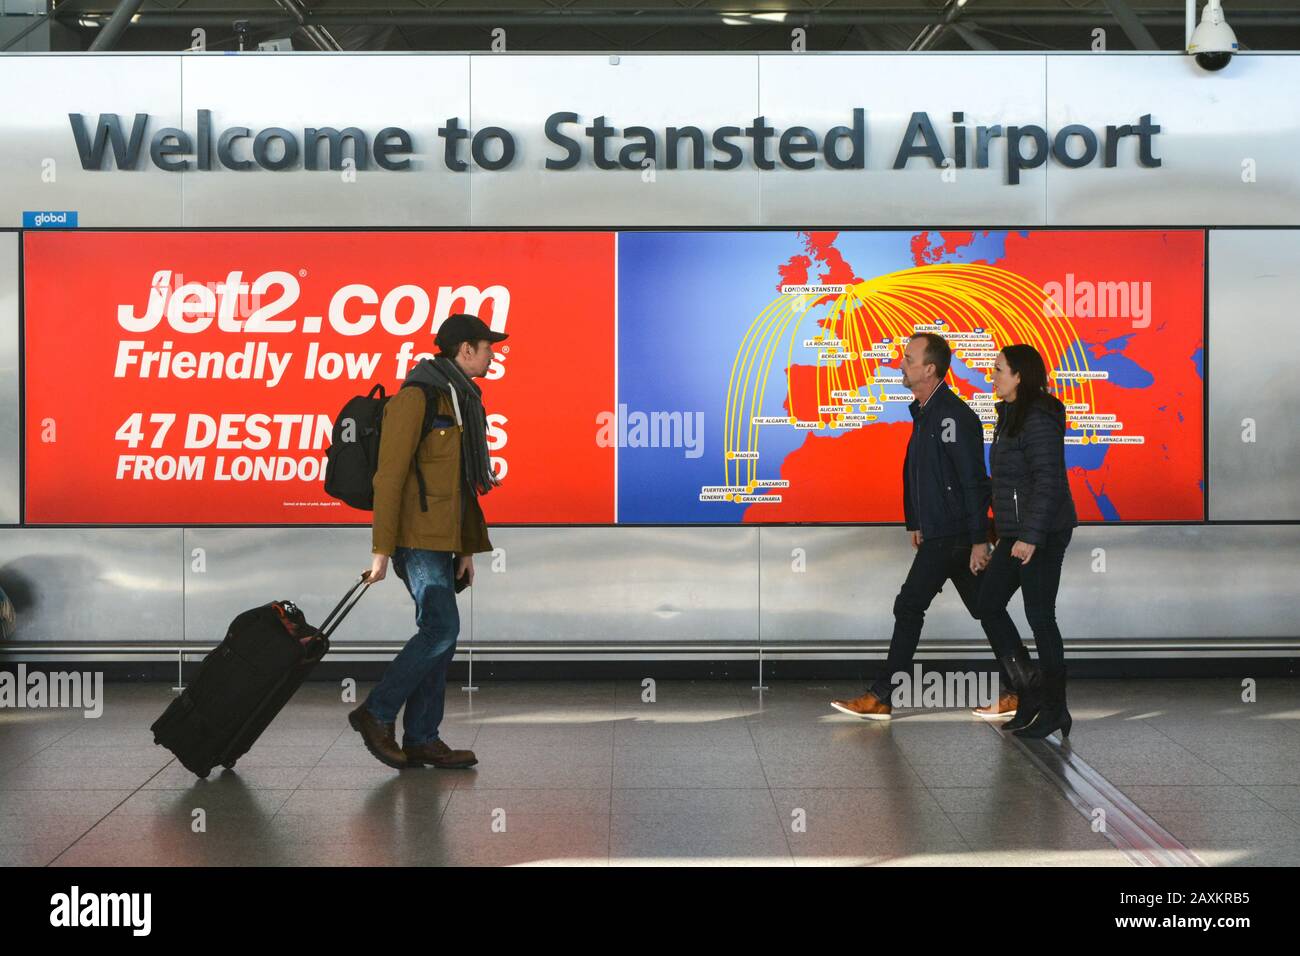 London Stansted Airport STN, United Kingdom UK,  Welcome sign at the entrance of the Airoprt Travellers with trolleys and passengers walking. Brexit Stock Photo